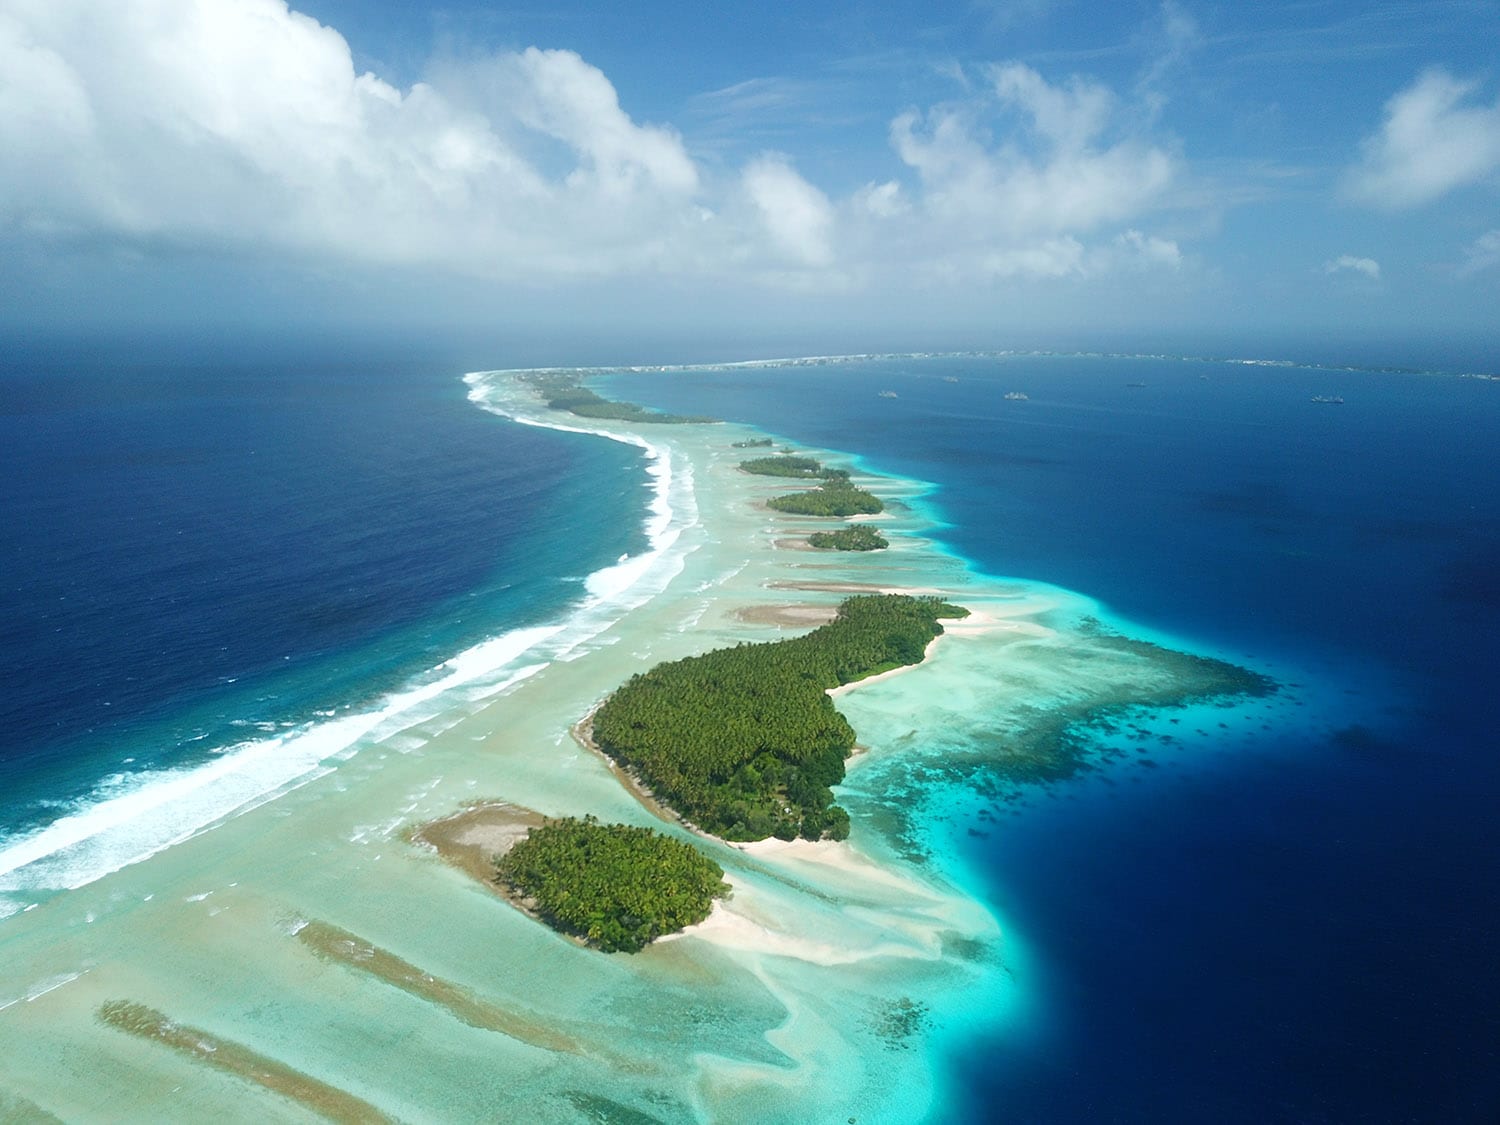 Aerial view of a narrow tropical island with lush greenery surrounded by vibrant turquoise waters and coral reefs.